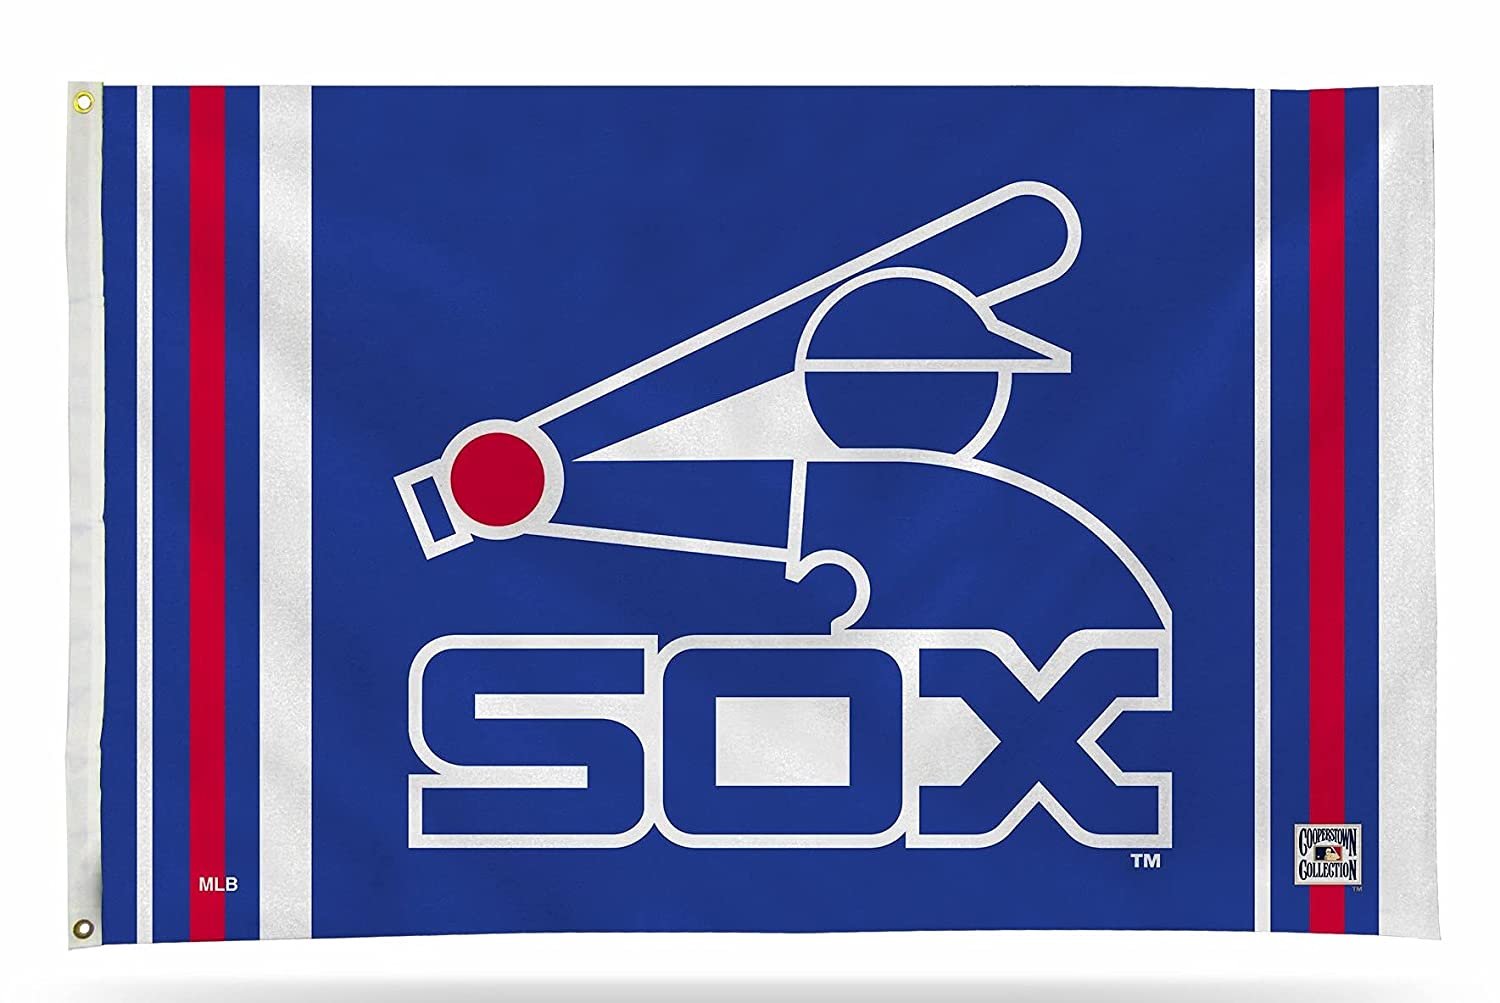 Chicago White Sox Premium 3x5 Feet Flag Banner, Cooperstown Retro Logo, Metal Grommets, Outdoor Indoor, Single Sided